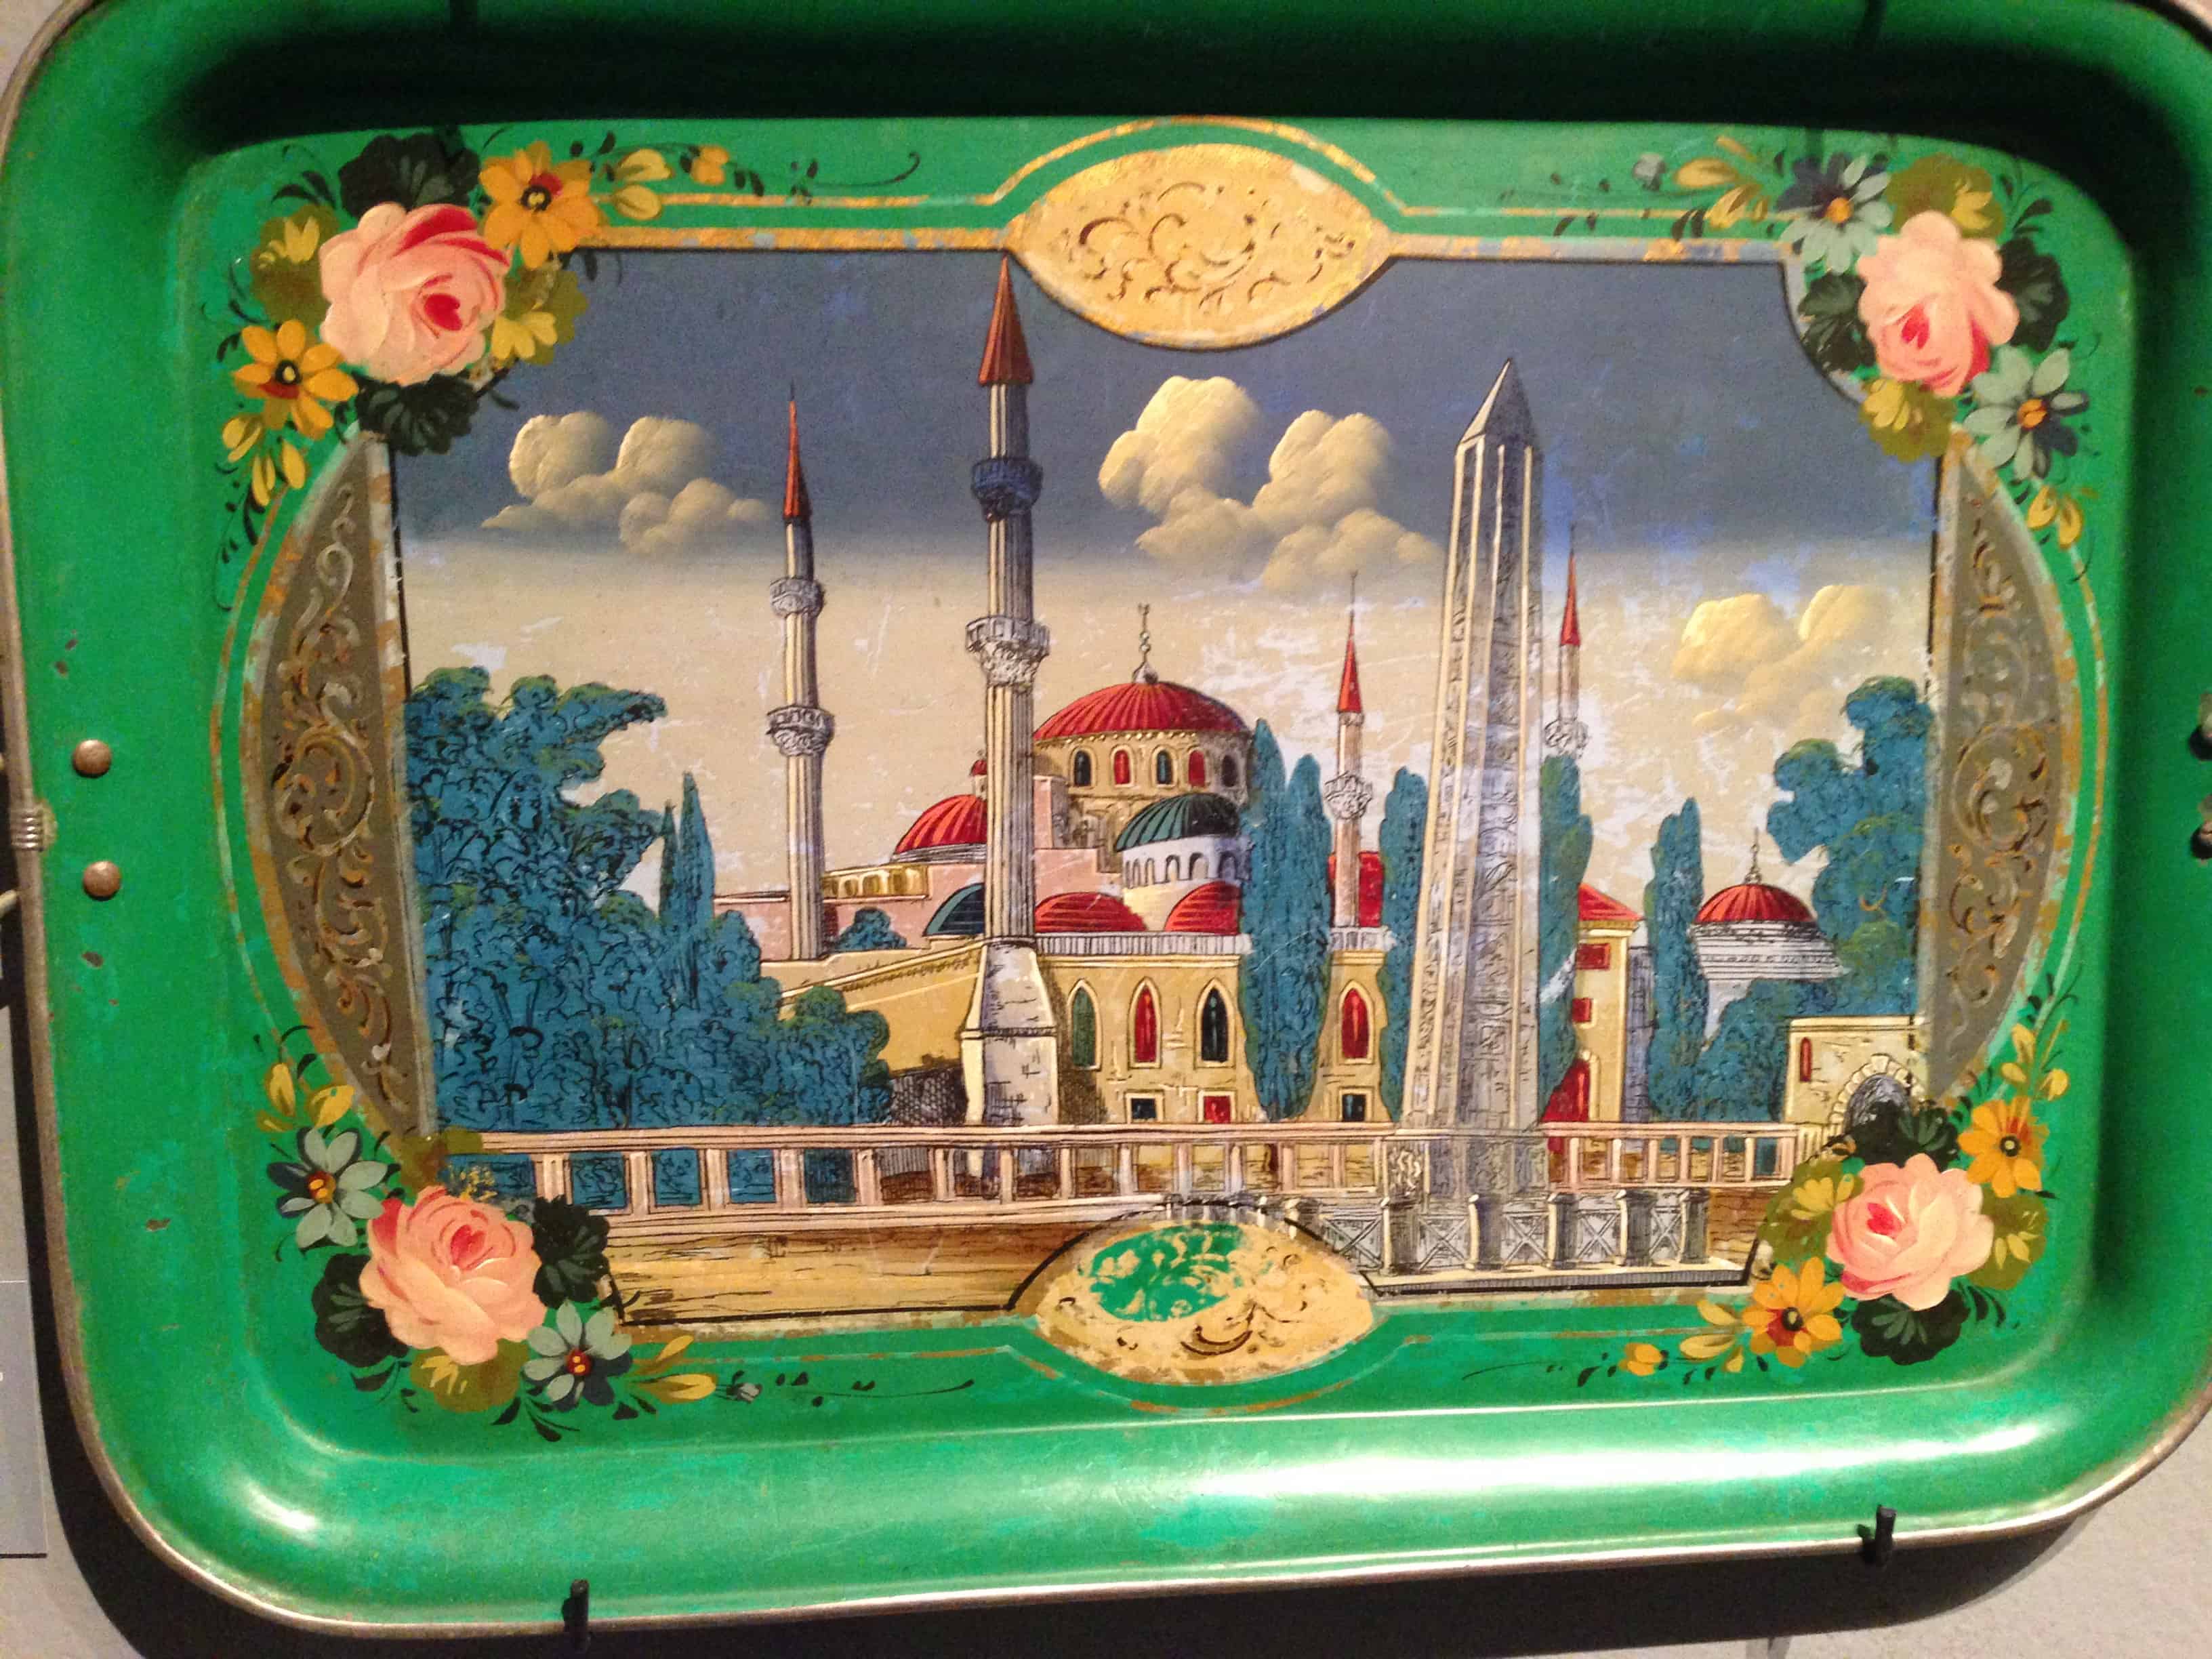 Decorative serving tray of Hagia Sophia at the Benaki Museum of Greek Culture in Athens, Greece